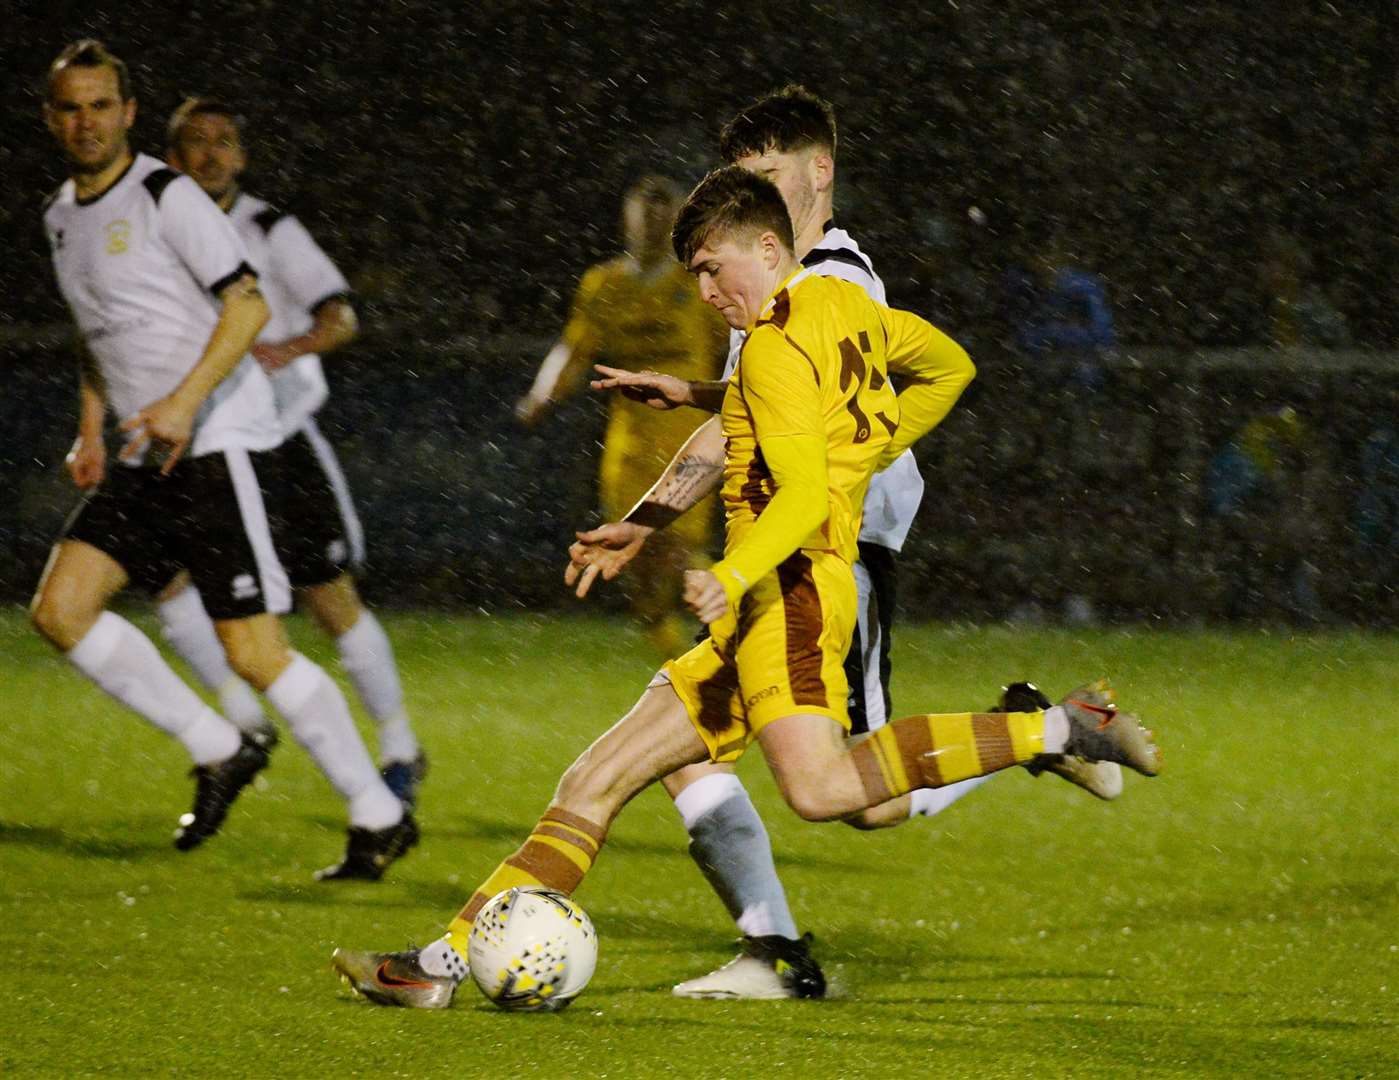 Owen Paterson fires in a goal for Forres at Clachnacuddin last season. Picture: Gary Anthony